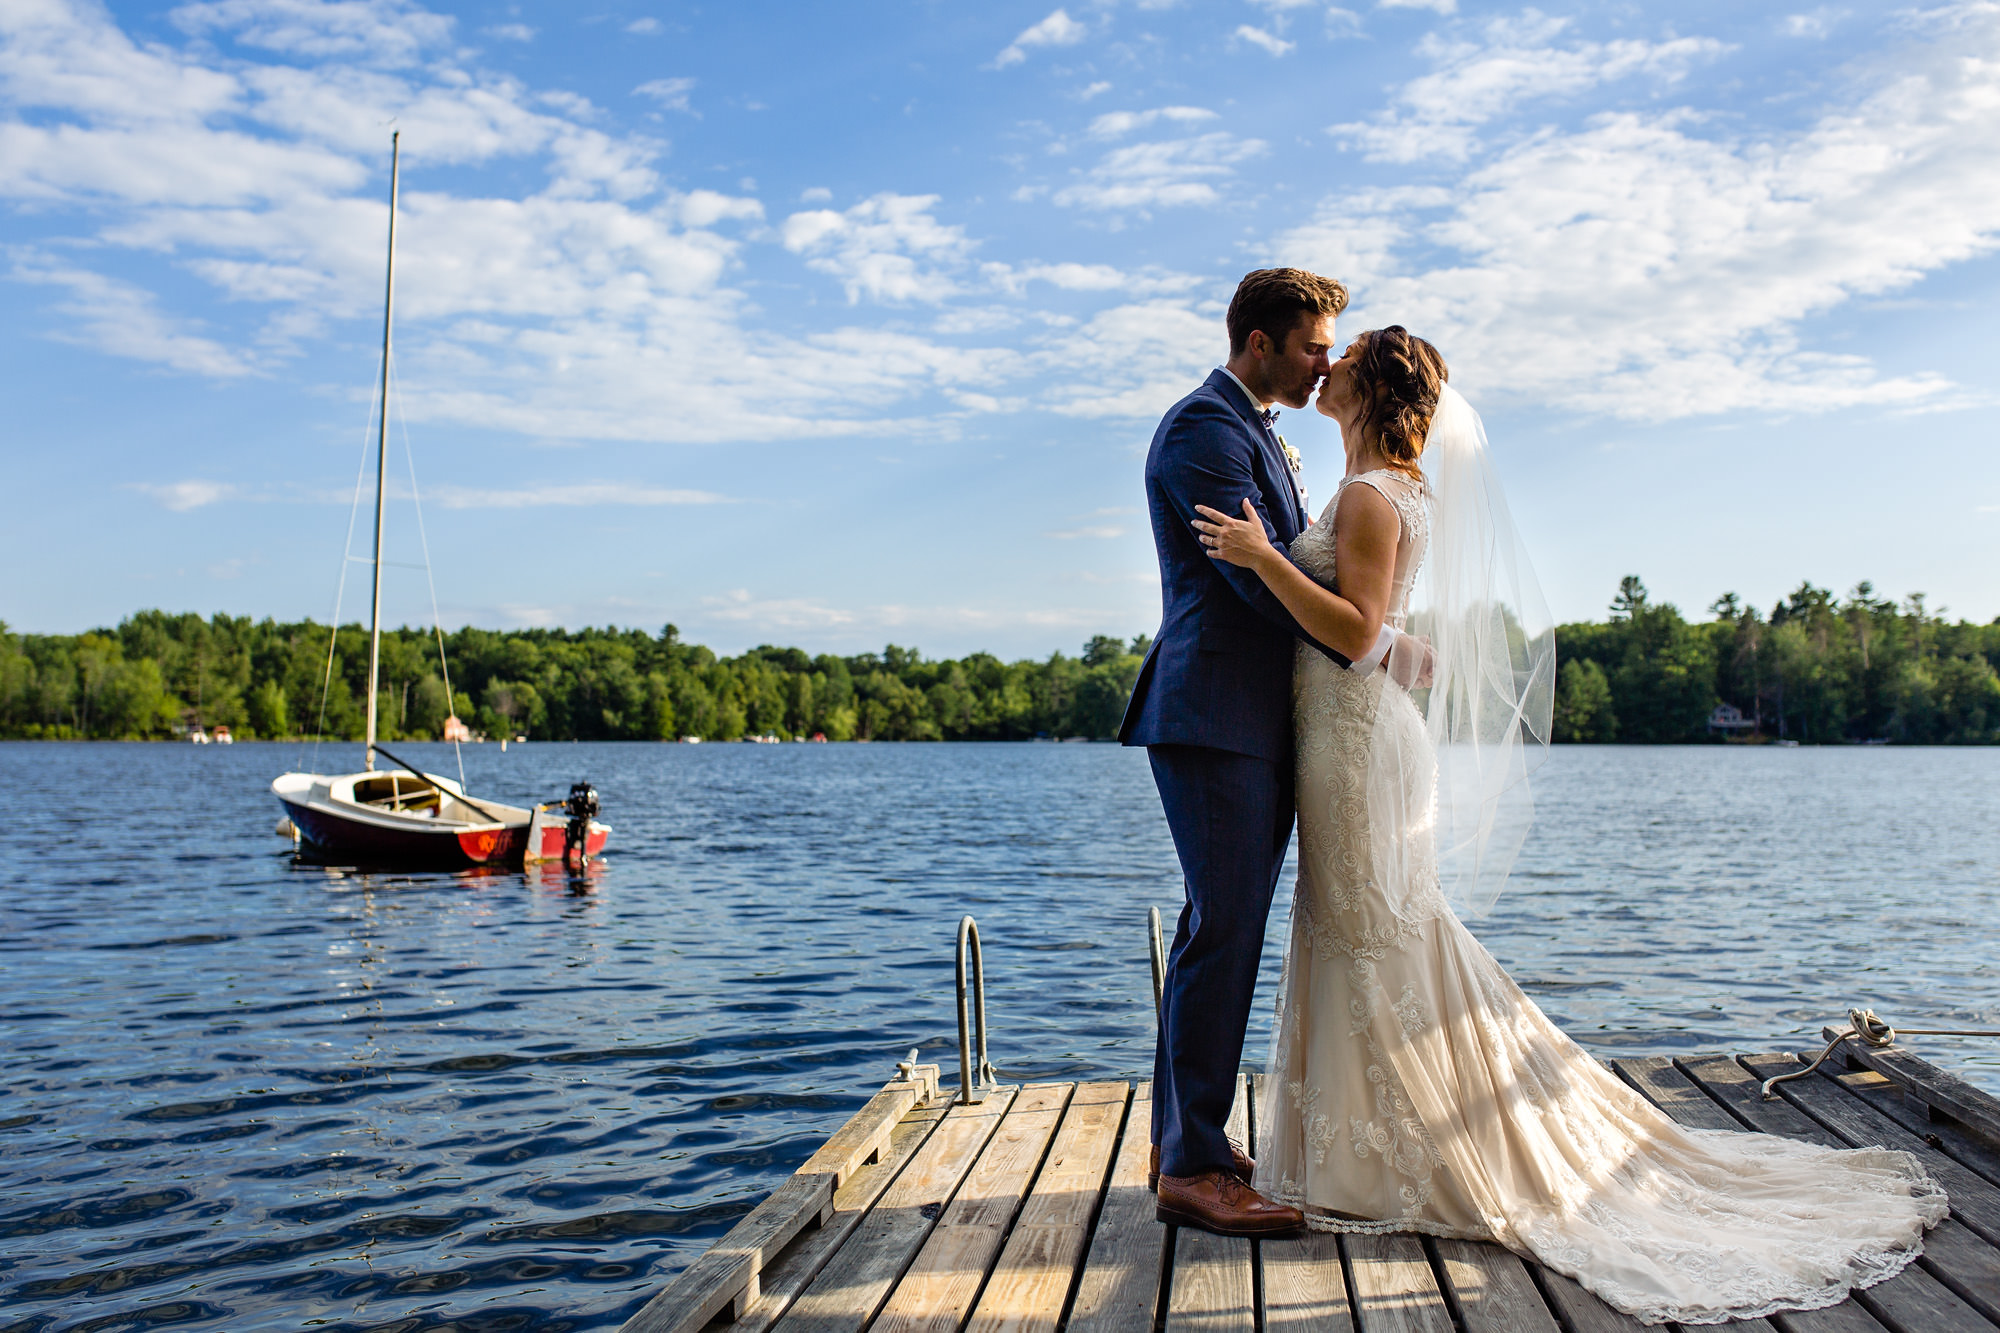 Beautiful bride and groom portraits on their private property in Maine.